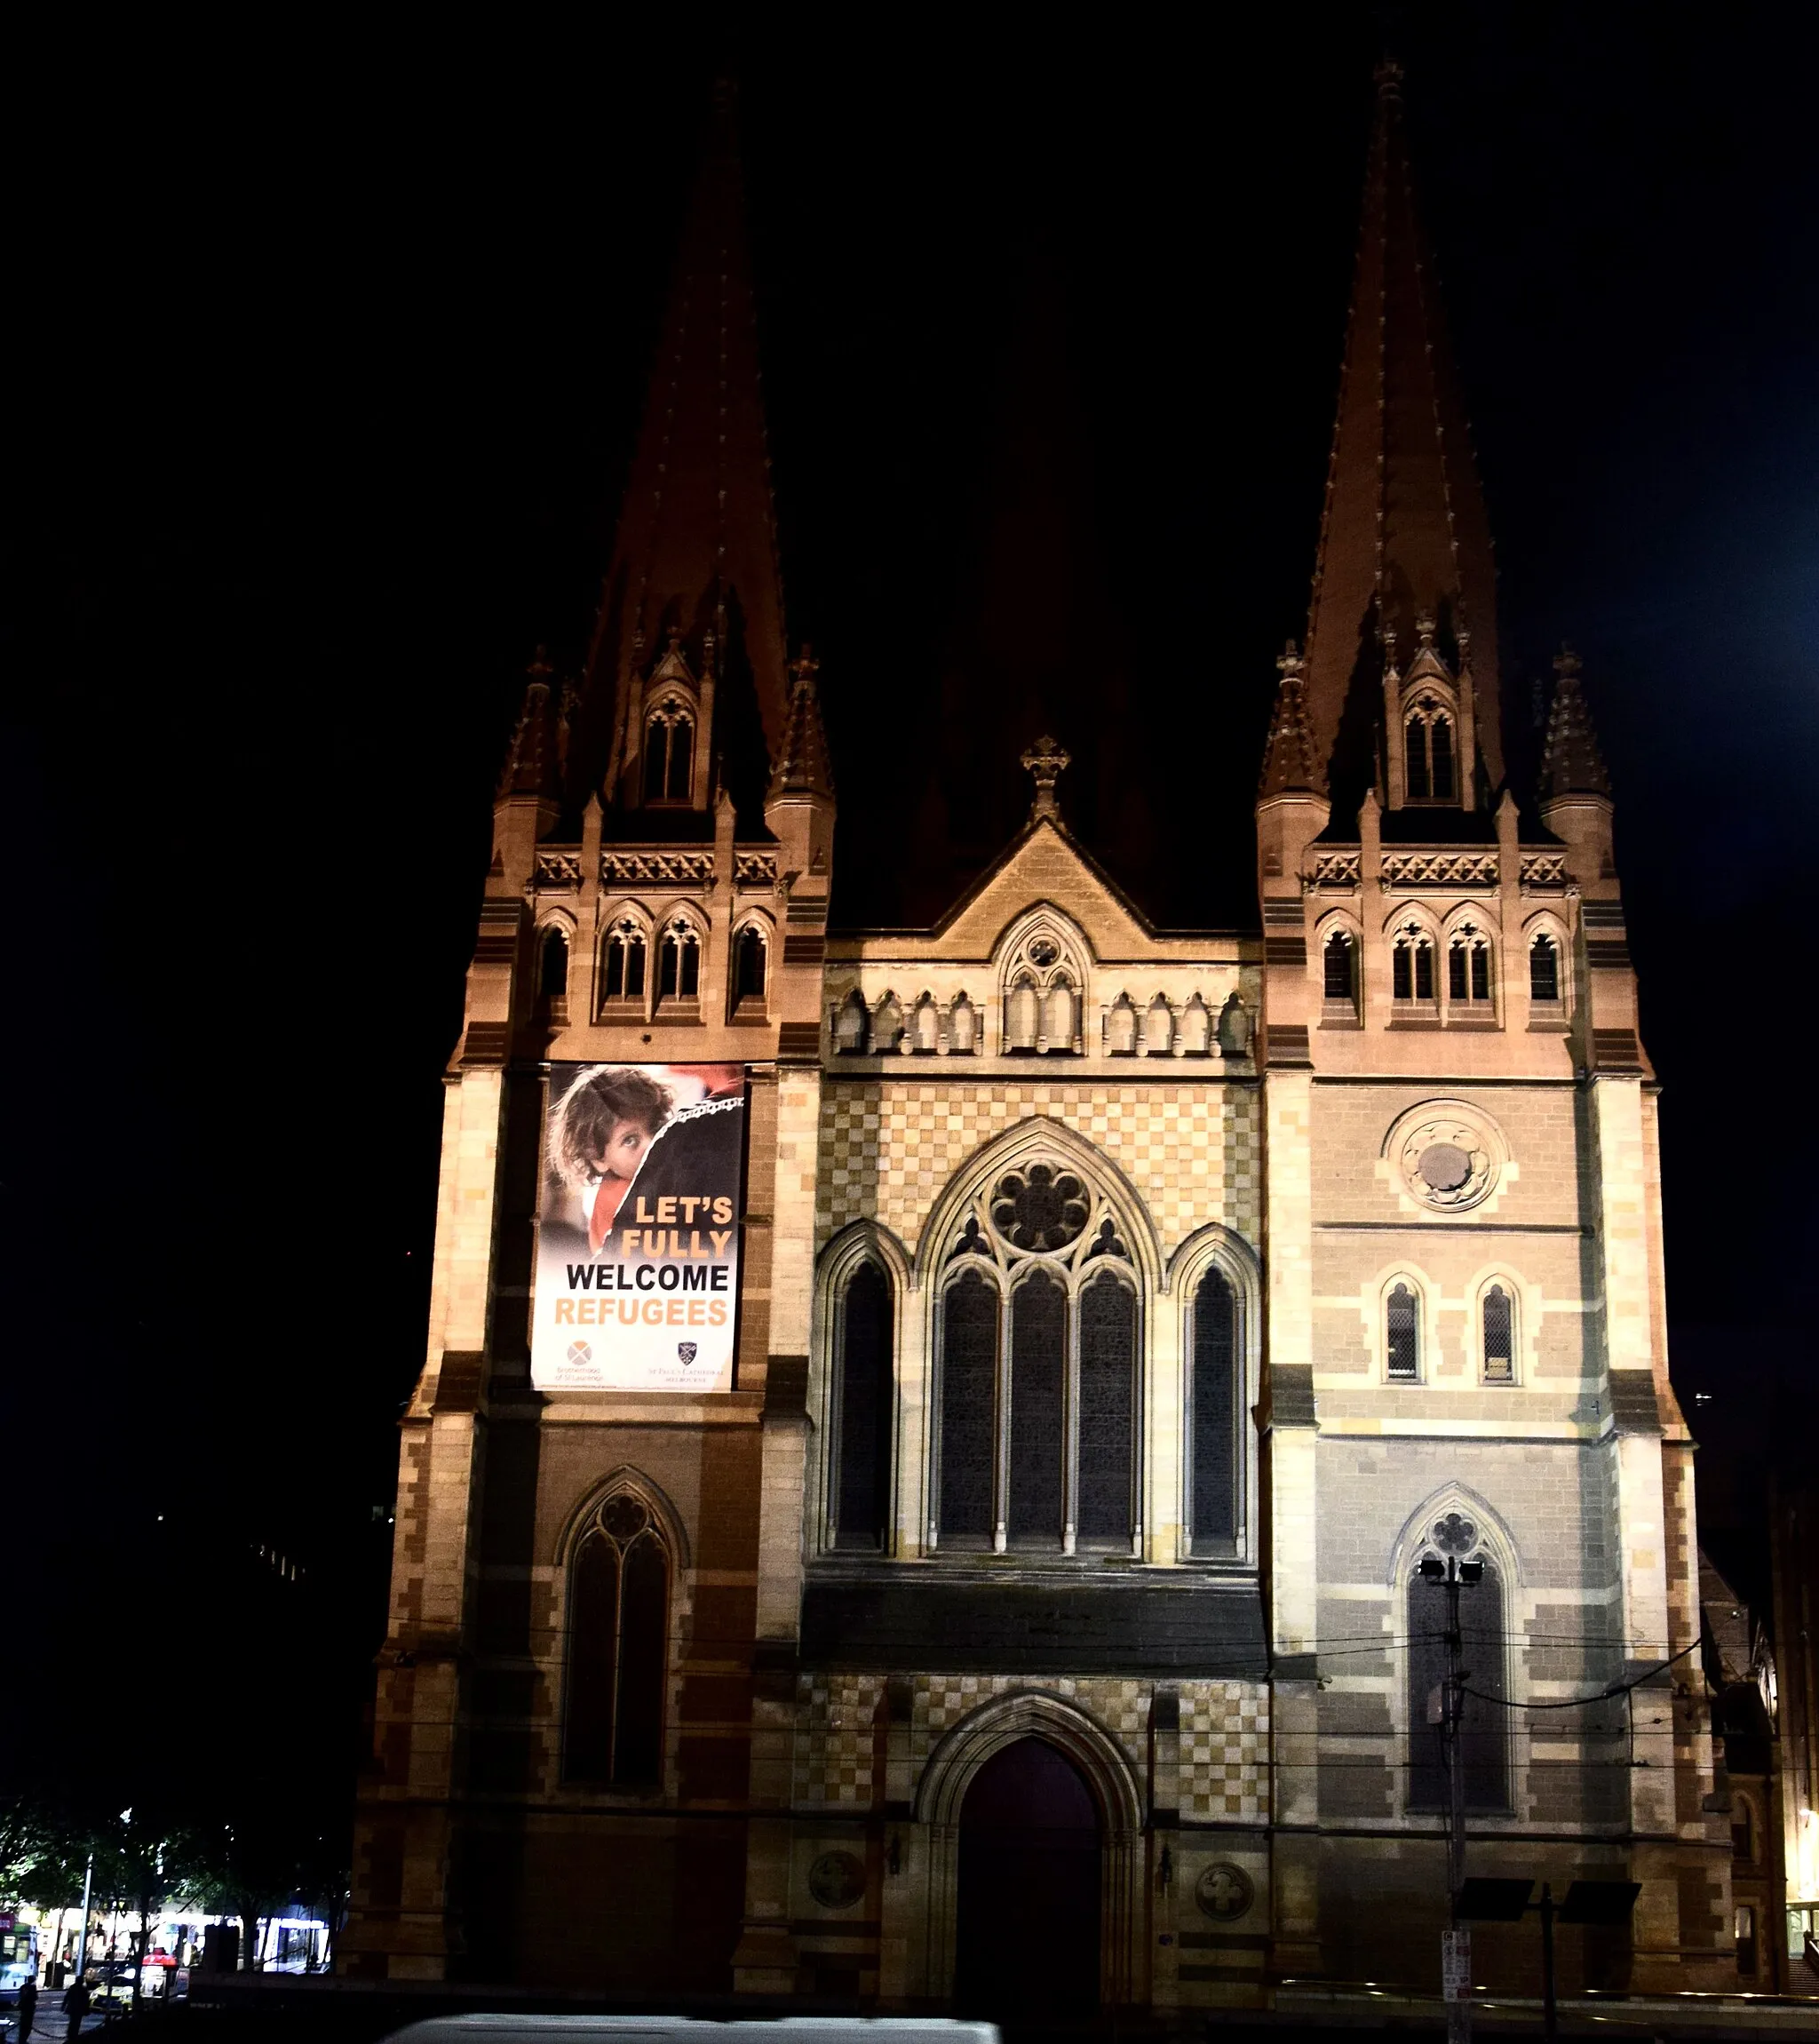 Photo showing: Saint Paul's Cathedral is an Anglican church in the heart of Melbourne, opposite Federation Square. It is a major Melbourne landmark.
Architect - William Butterfield
Architecture Style - Neo-Gothic Transitional 
Denomination- Anglican Church of Australia
Construction Completion - 1891
Consecration - 1891

https://cathedral.org.au/